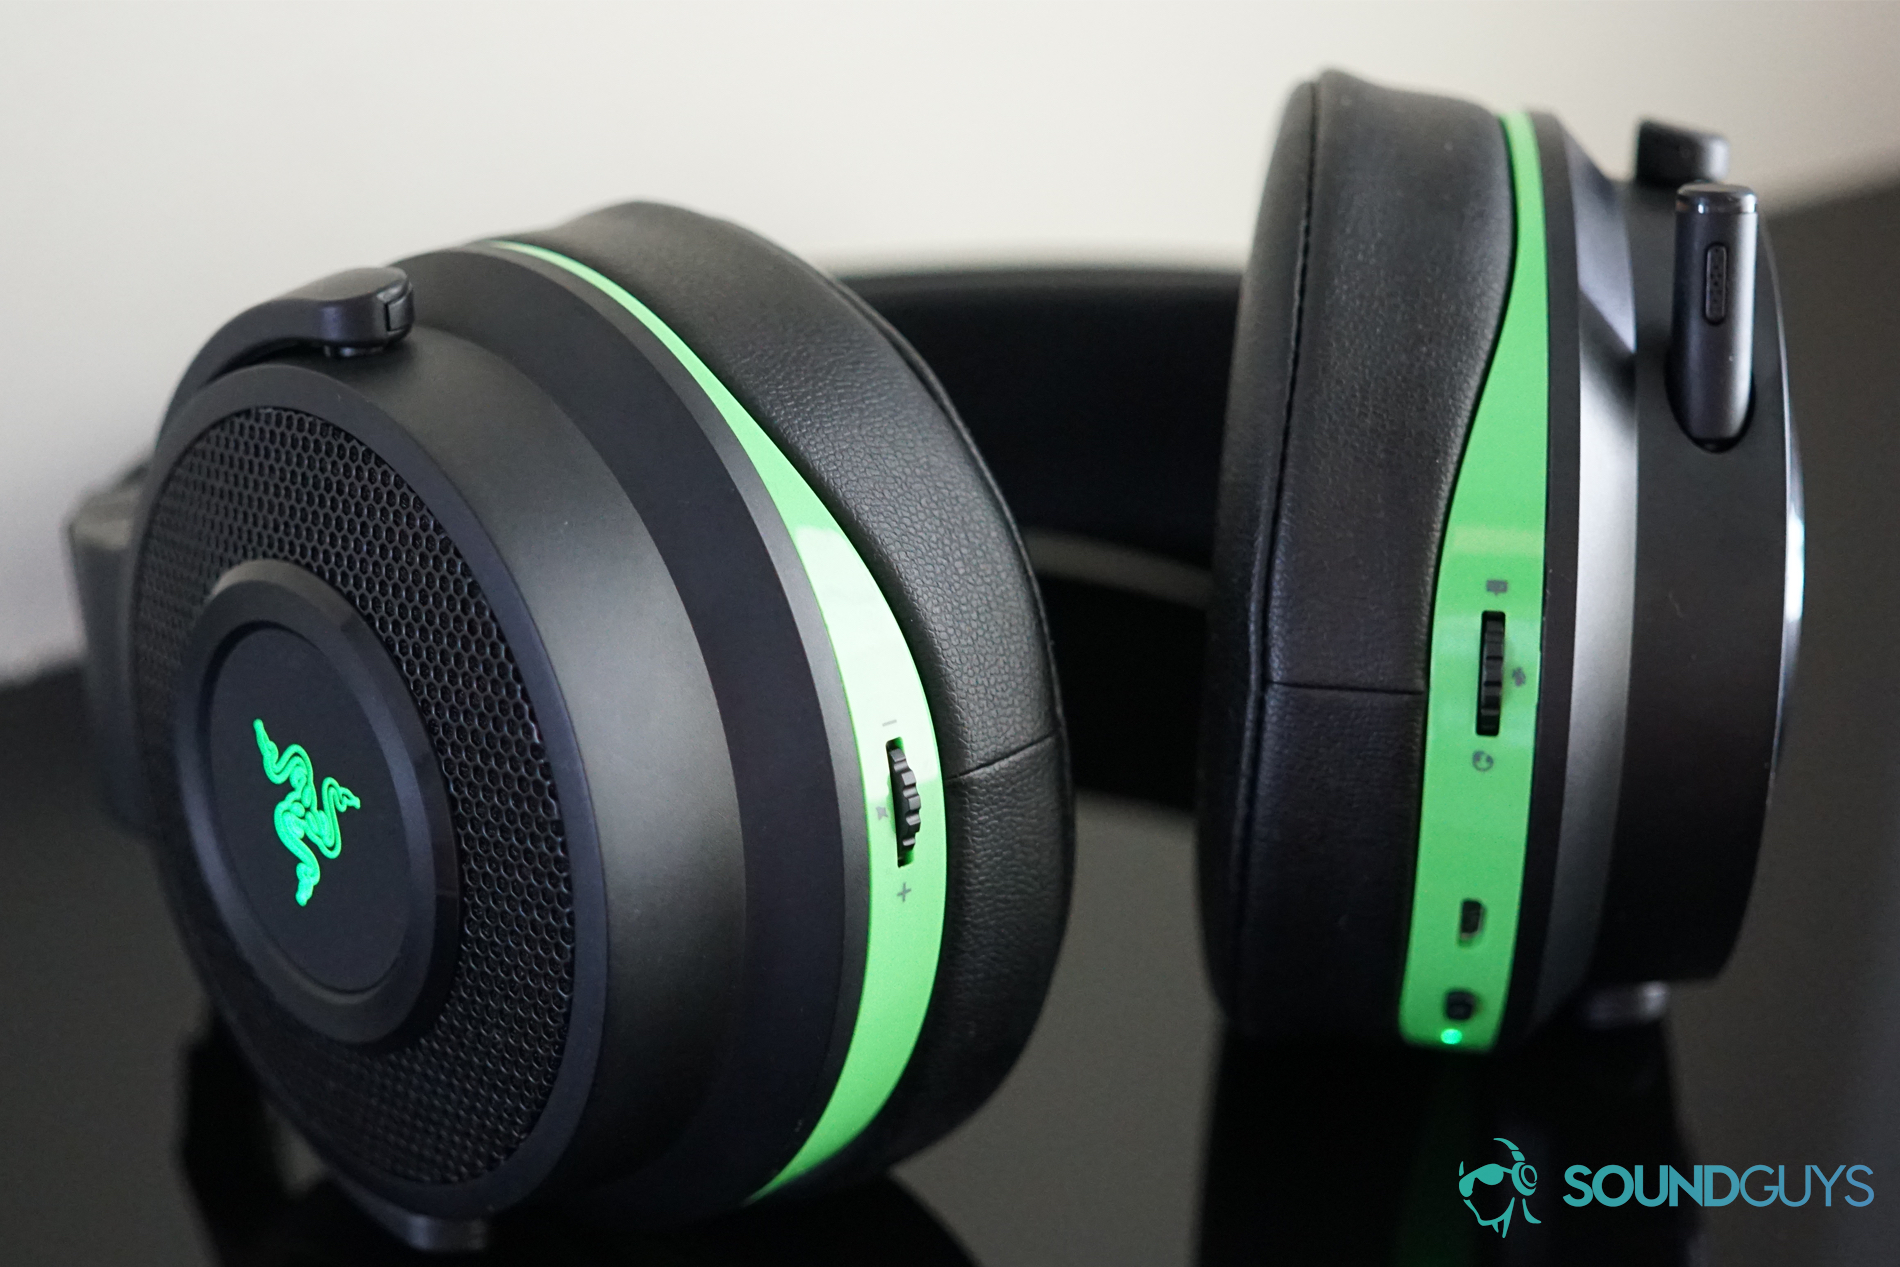 Razer Ultimate: Rock solid gaming headset for XBox, PC